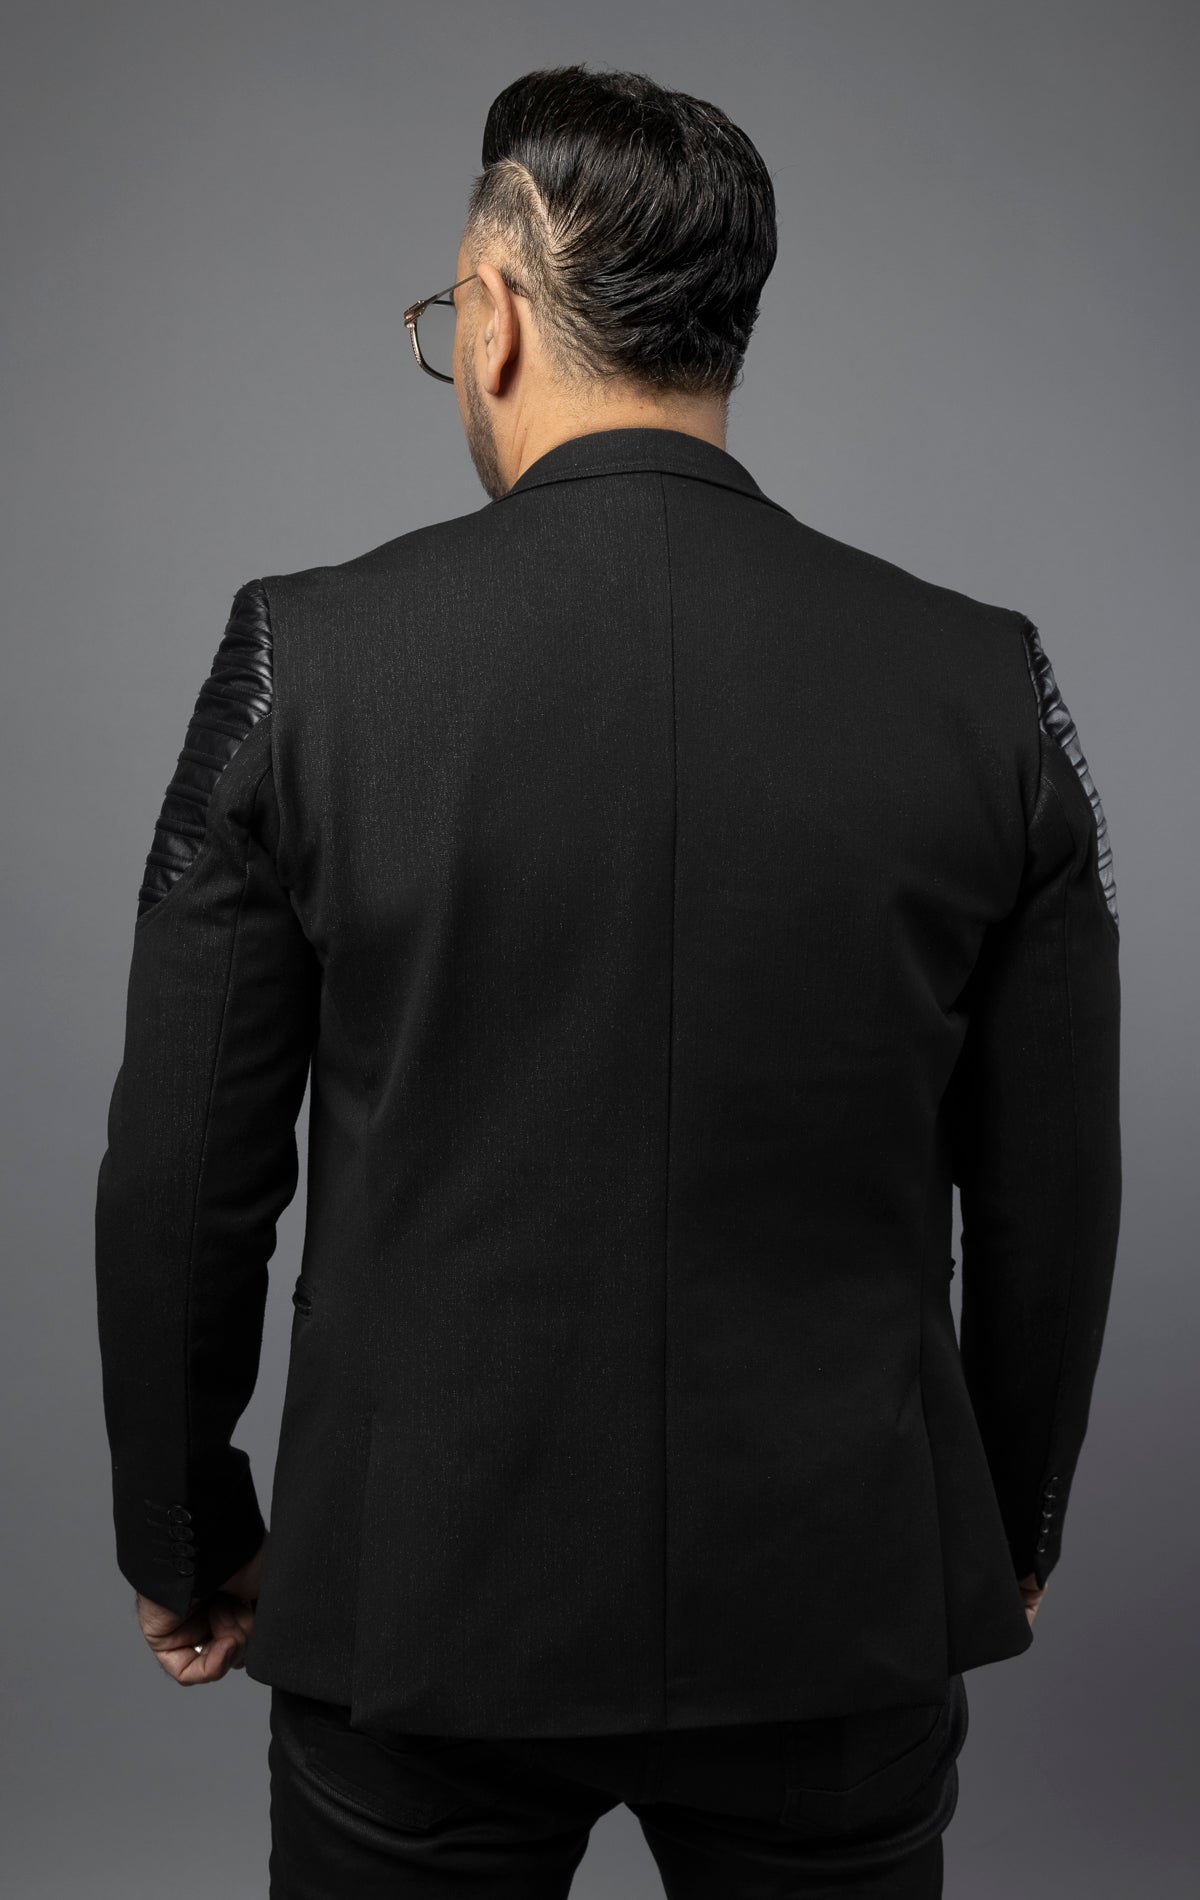 Structured construction with a modern notch lapel and zipper closure for a sleek look. Zipper pockets on the sides and chest, along with moto-inspired patches on the shoulders, add a touch of edginess. The slim fit is complemented by 4 non-functional button cuffs, and the double vented design completes the fully lined jacket.